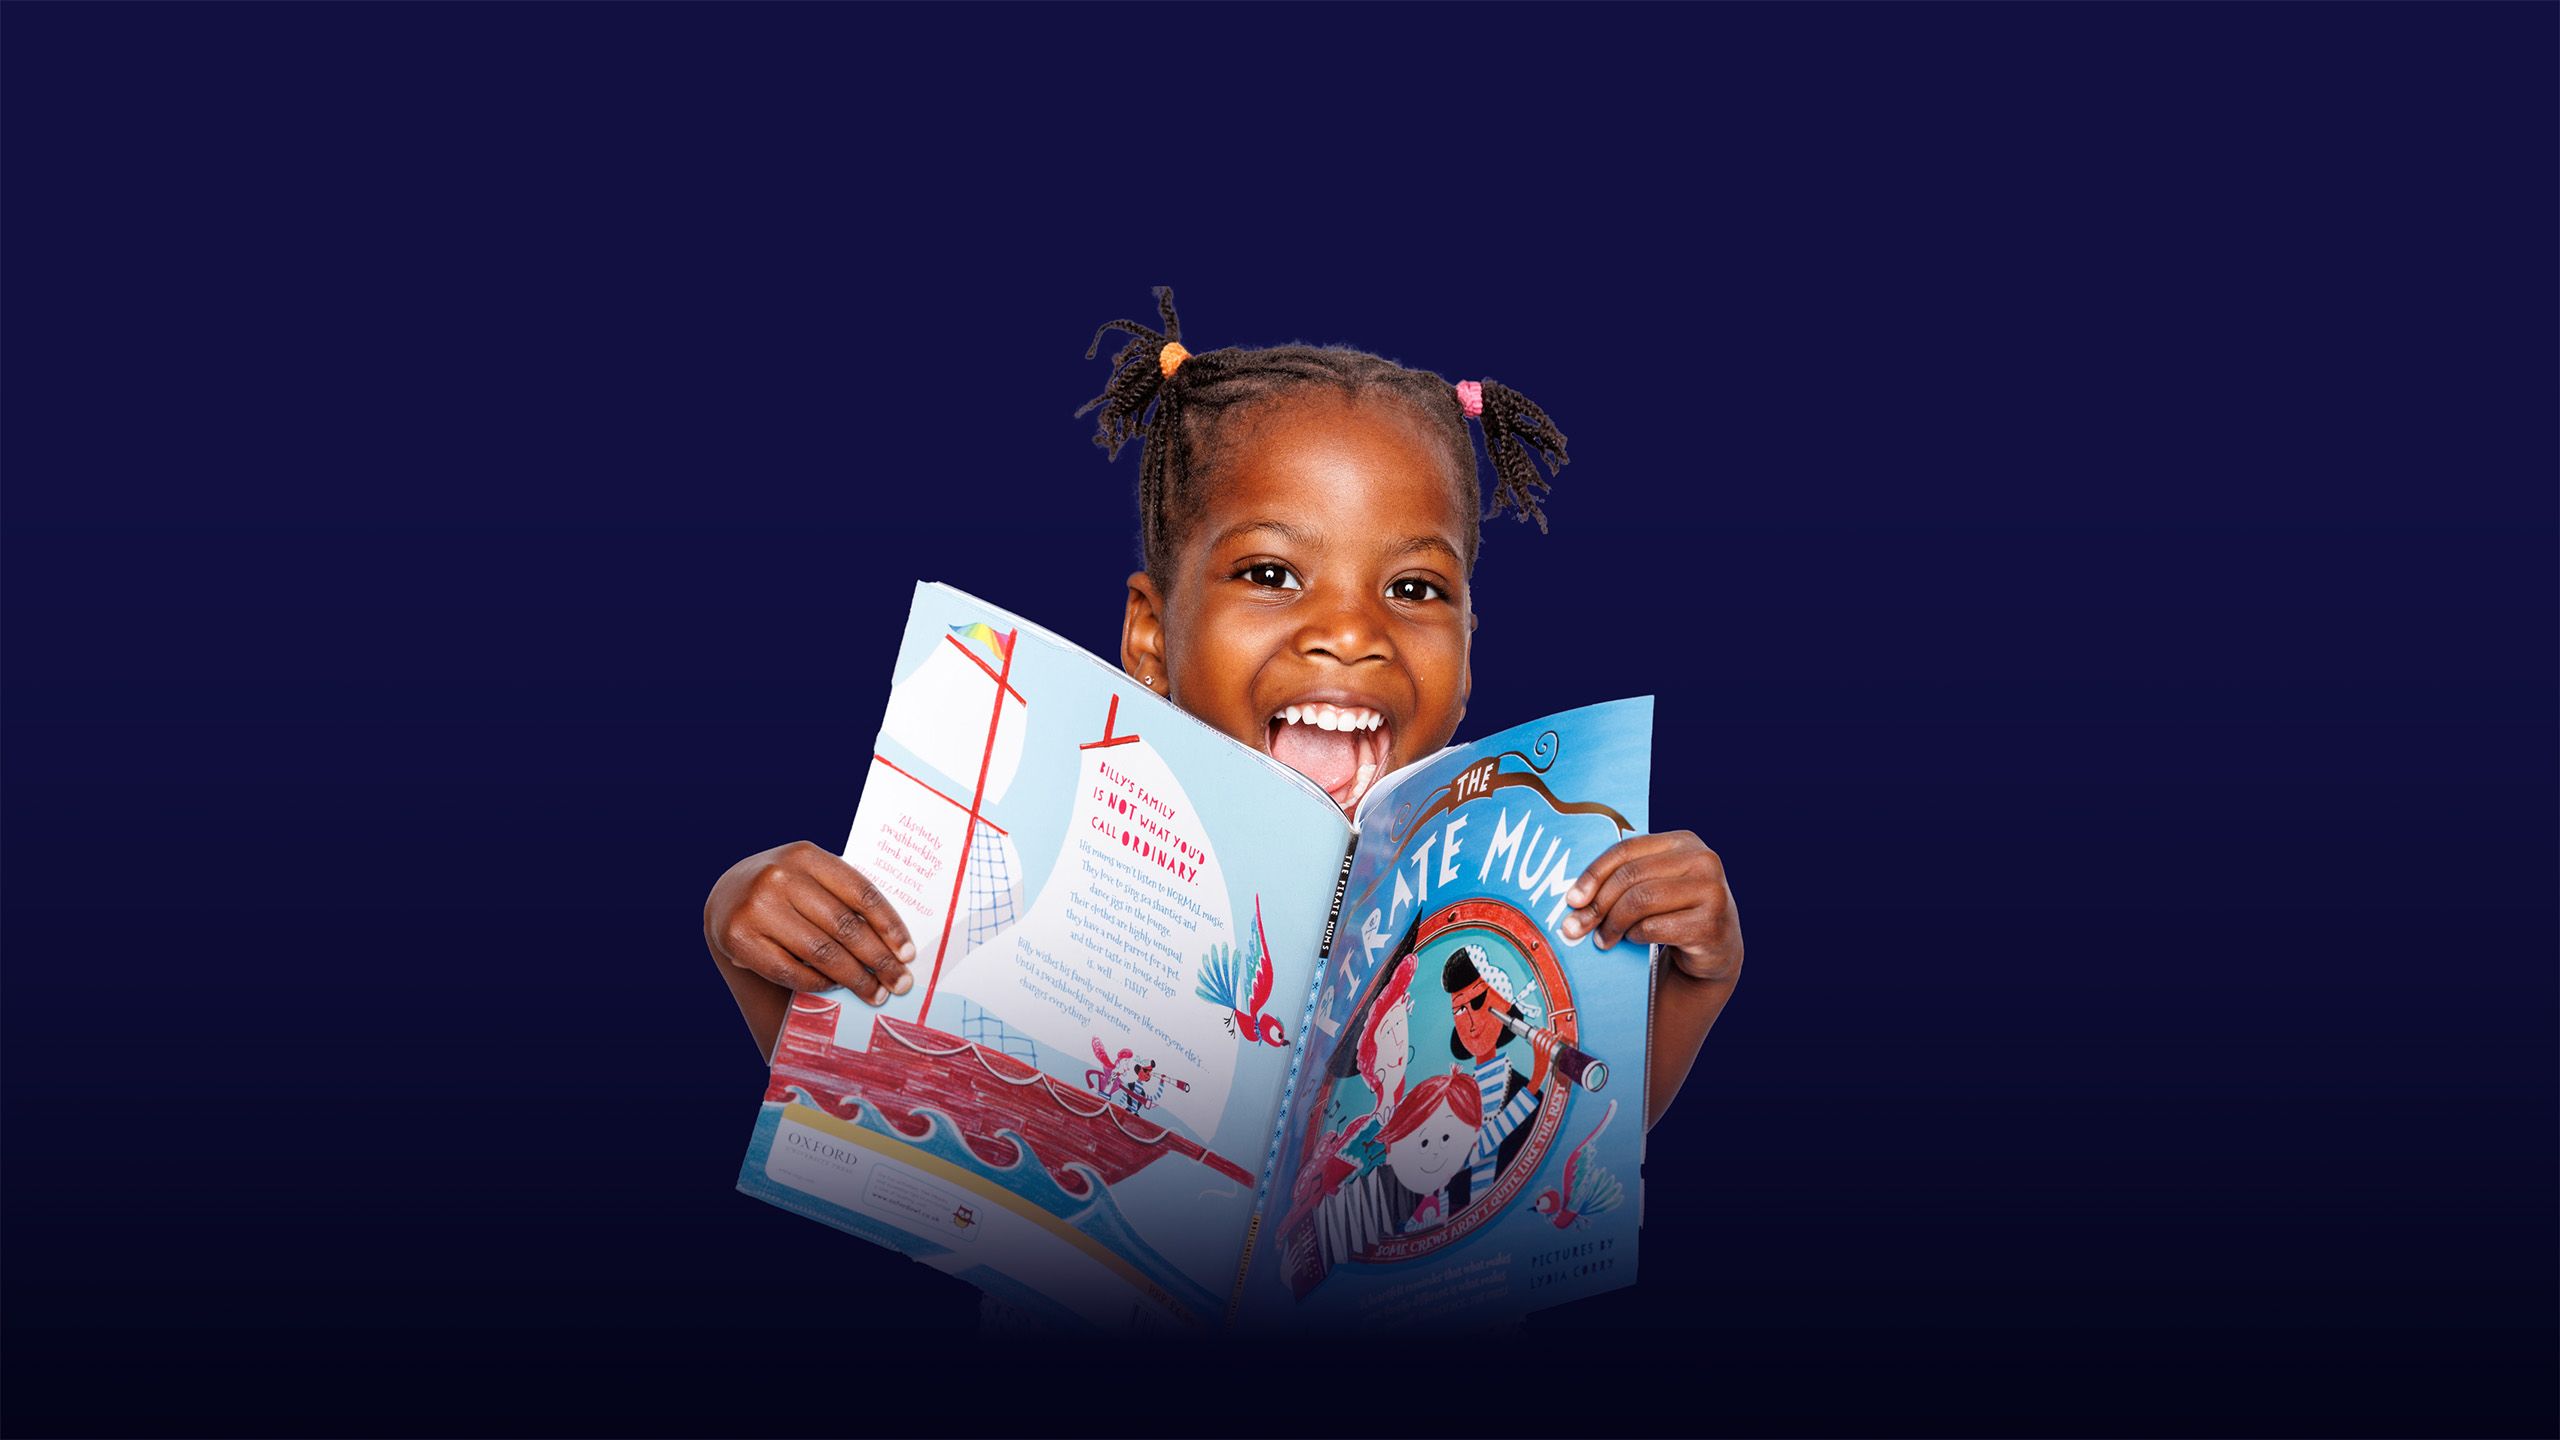 A little girl against a dark background, looking straight ahead with an open mouth smile, holding an opened book, with an overlay of the text "inspiring minds" 